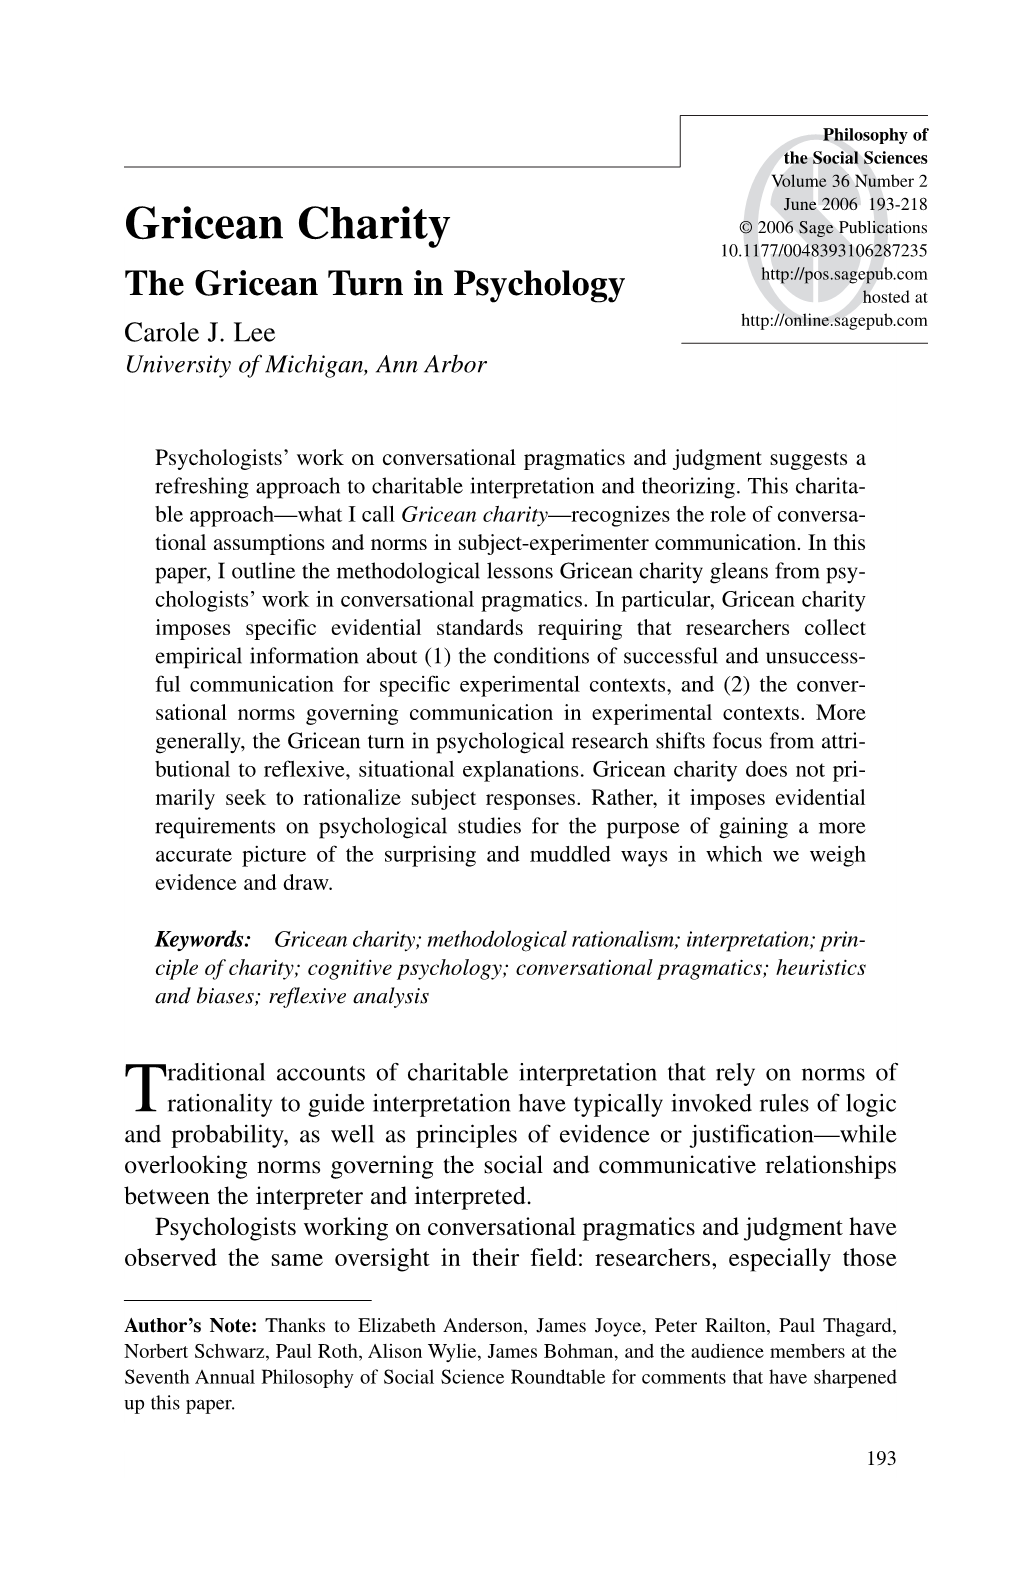 Gricean Charity © 2006 Sage Publications 10.1177/0048393106287235 the Gricean Turn in Psychology Hosted at Carole J